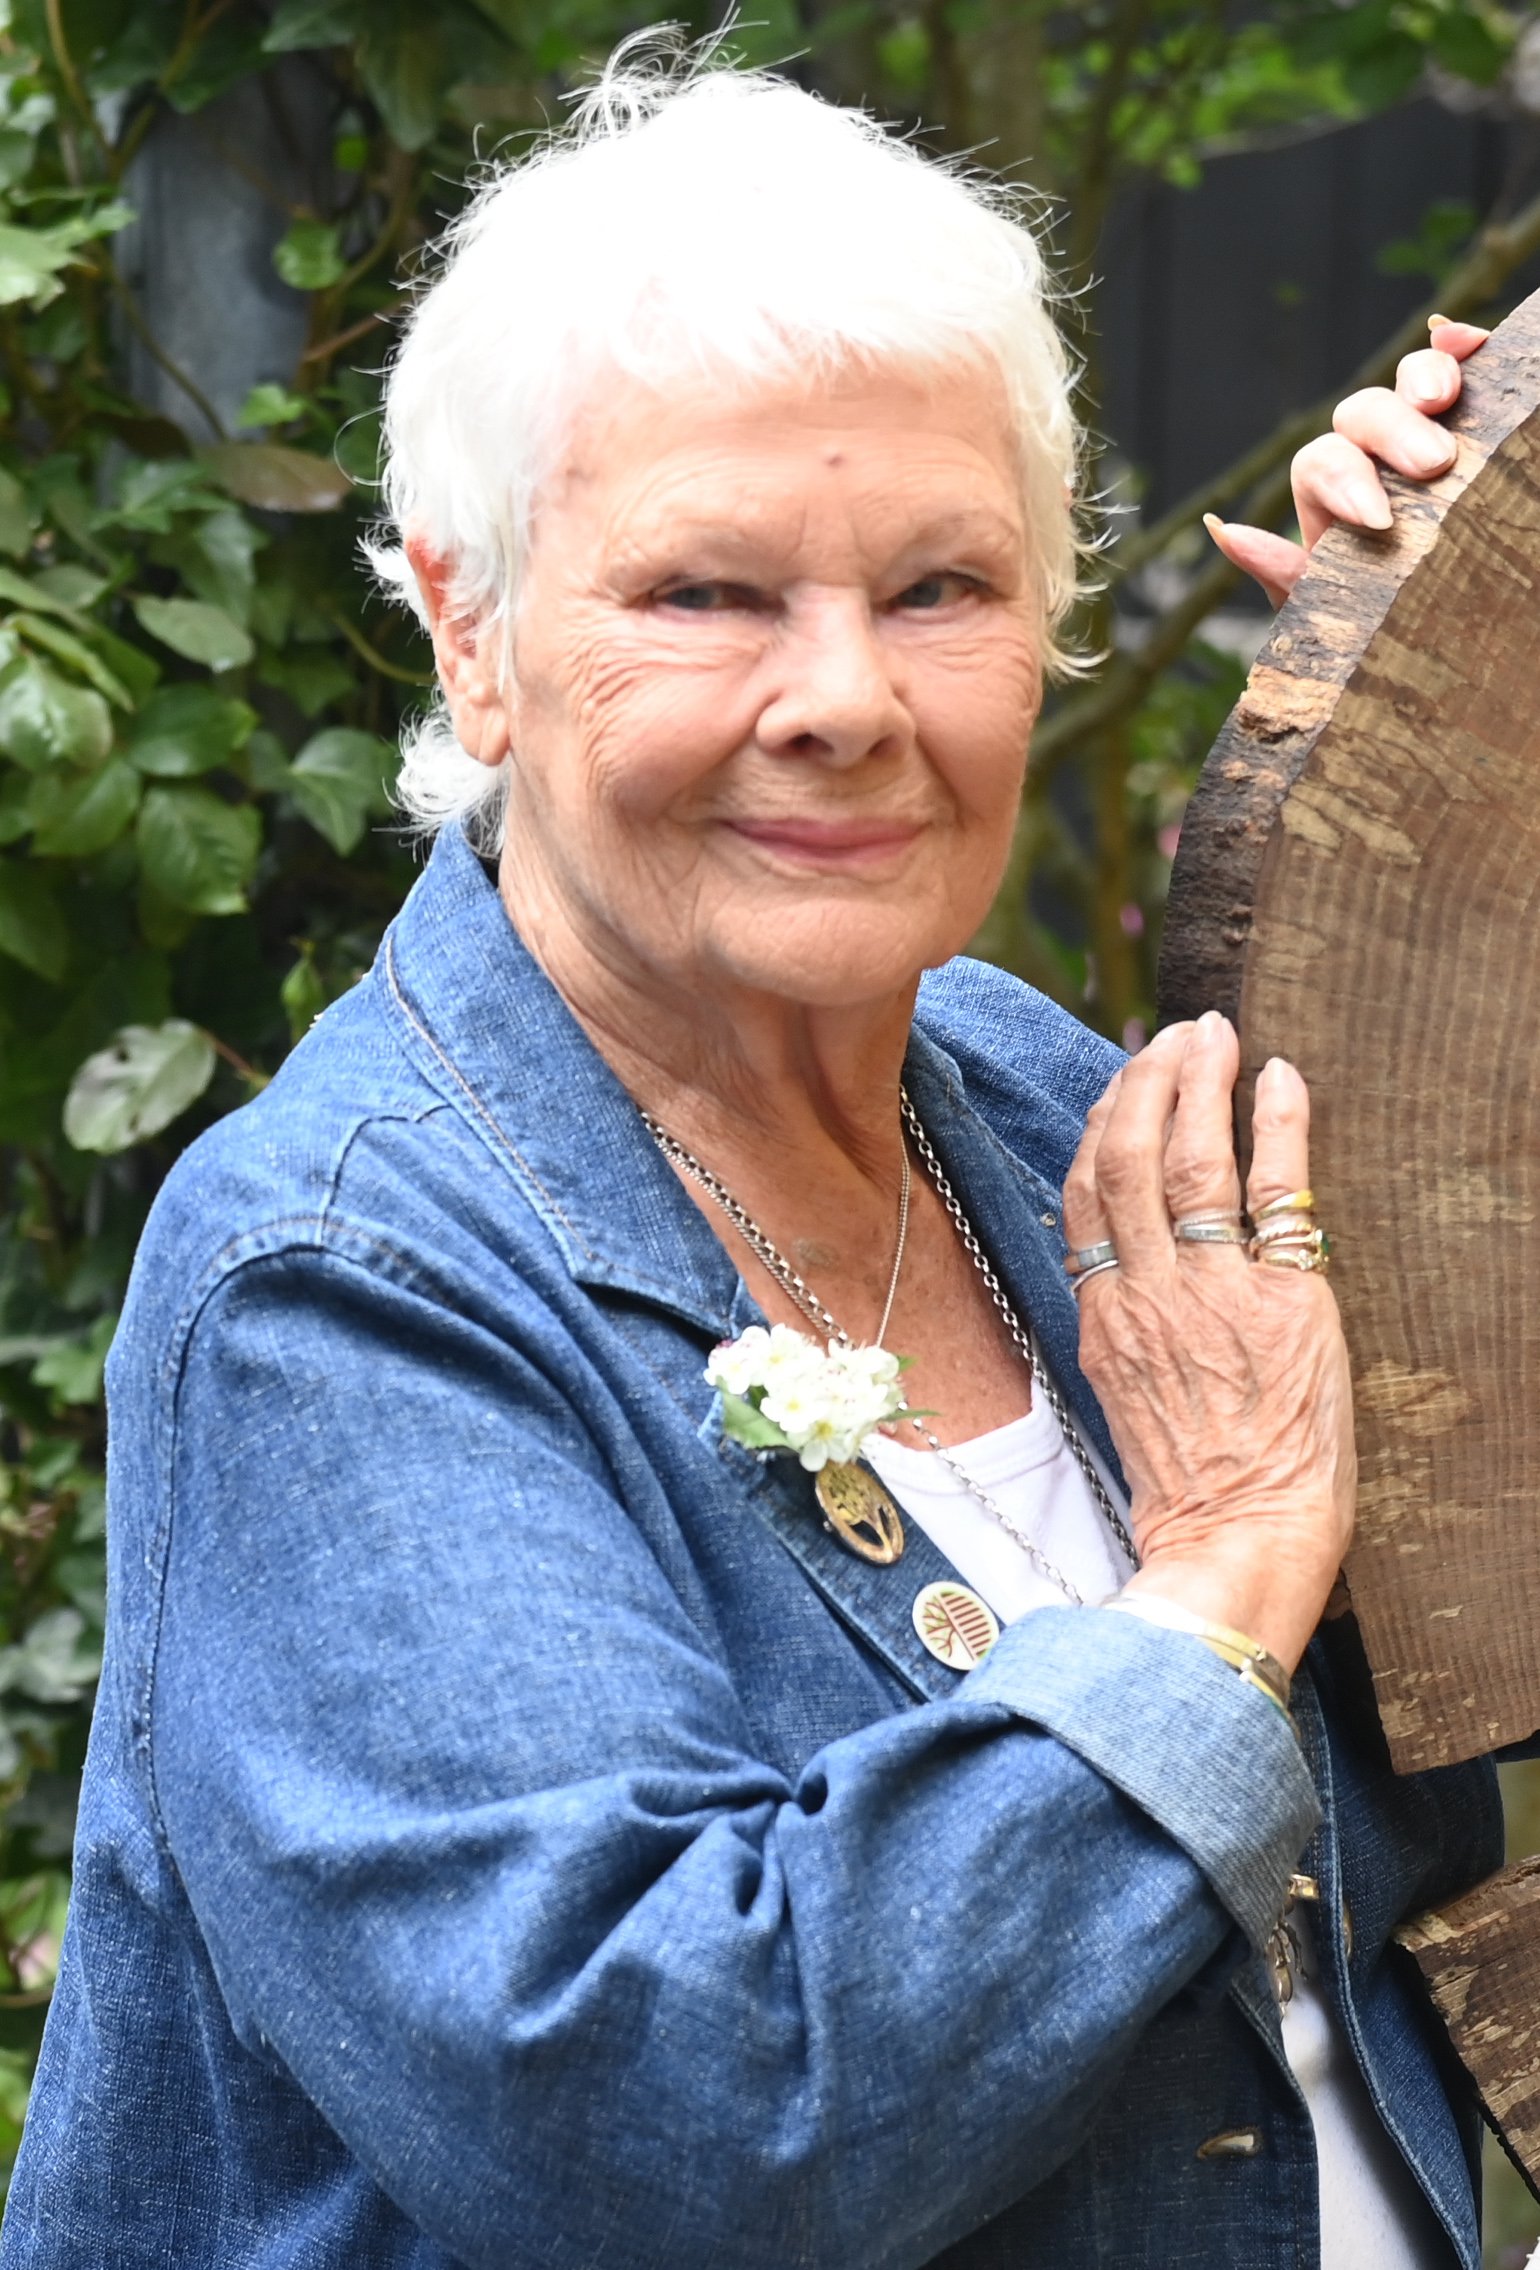 Judy Dench attends press day at the RHS Chelsea Flower Show at The Royal Hospital Chelsea on May 23, 2022, in London, England. | Source: Getty Images